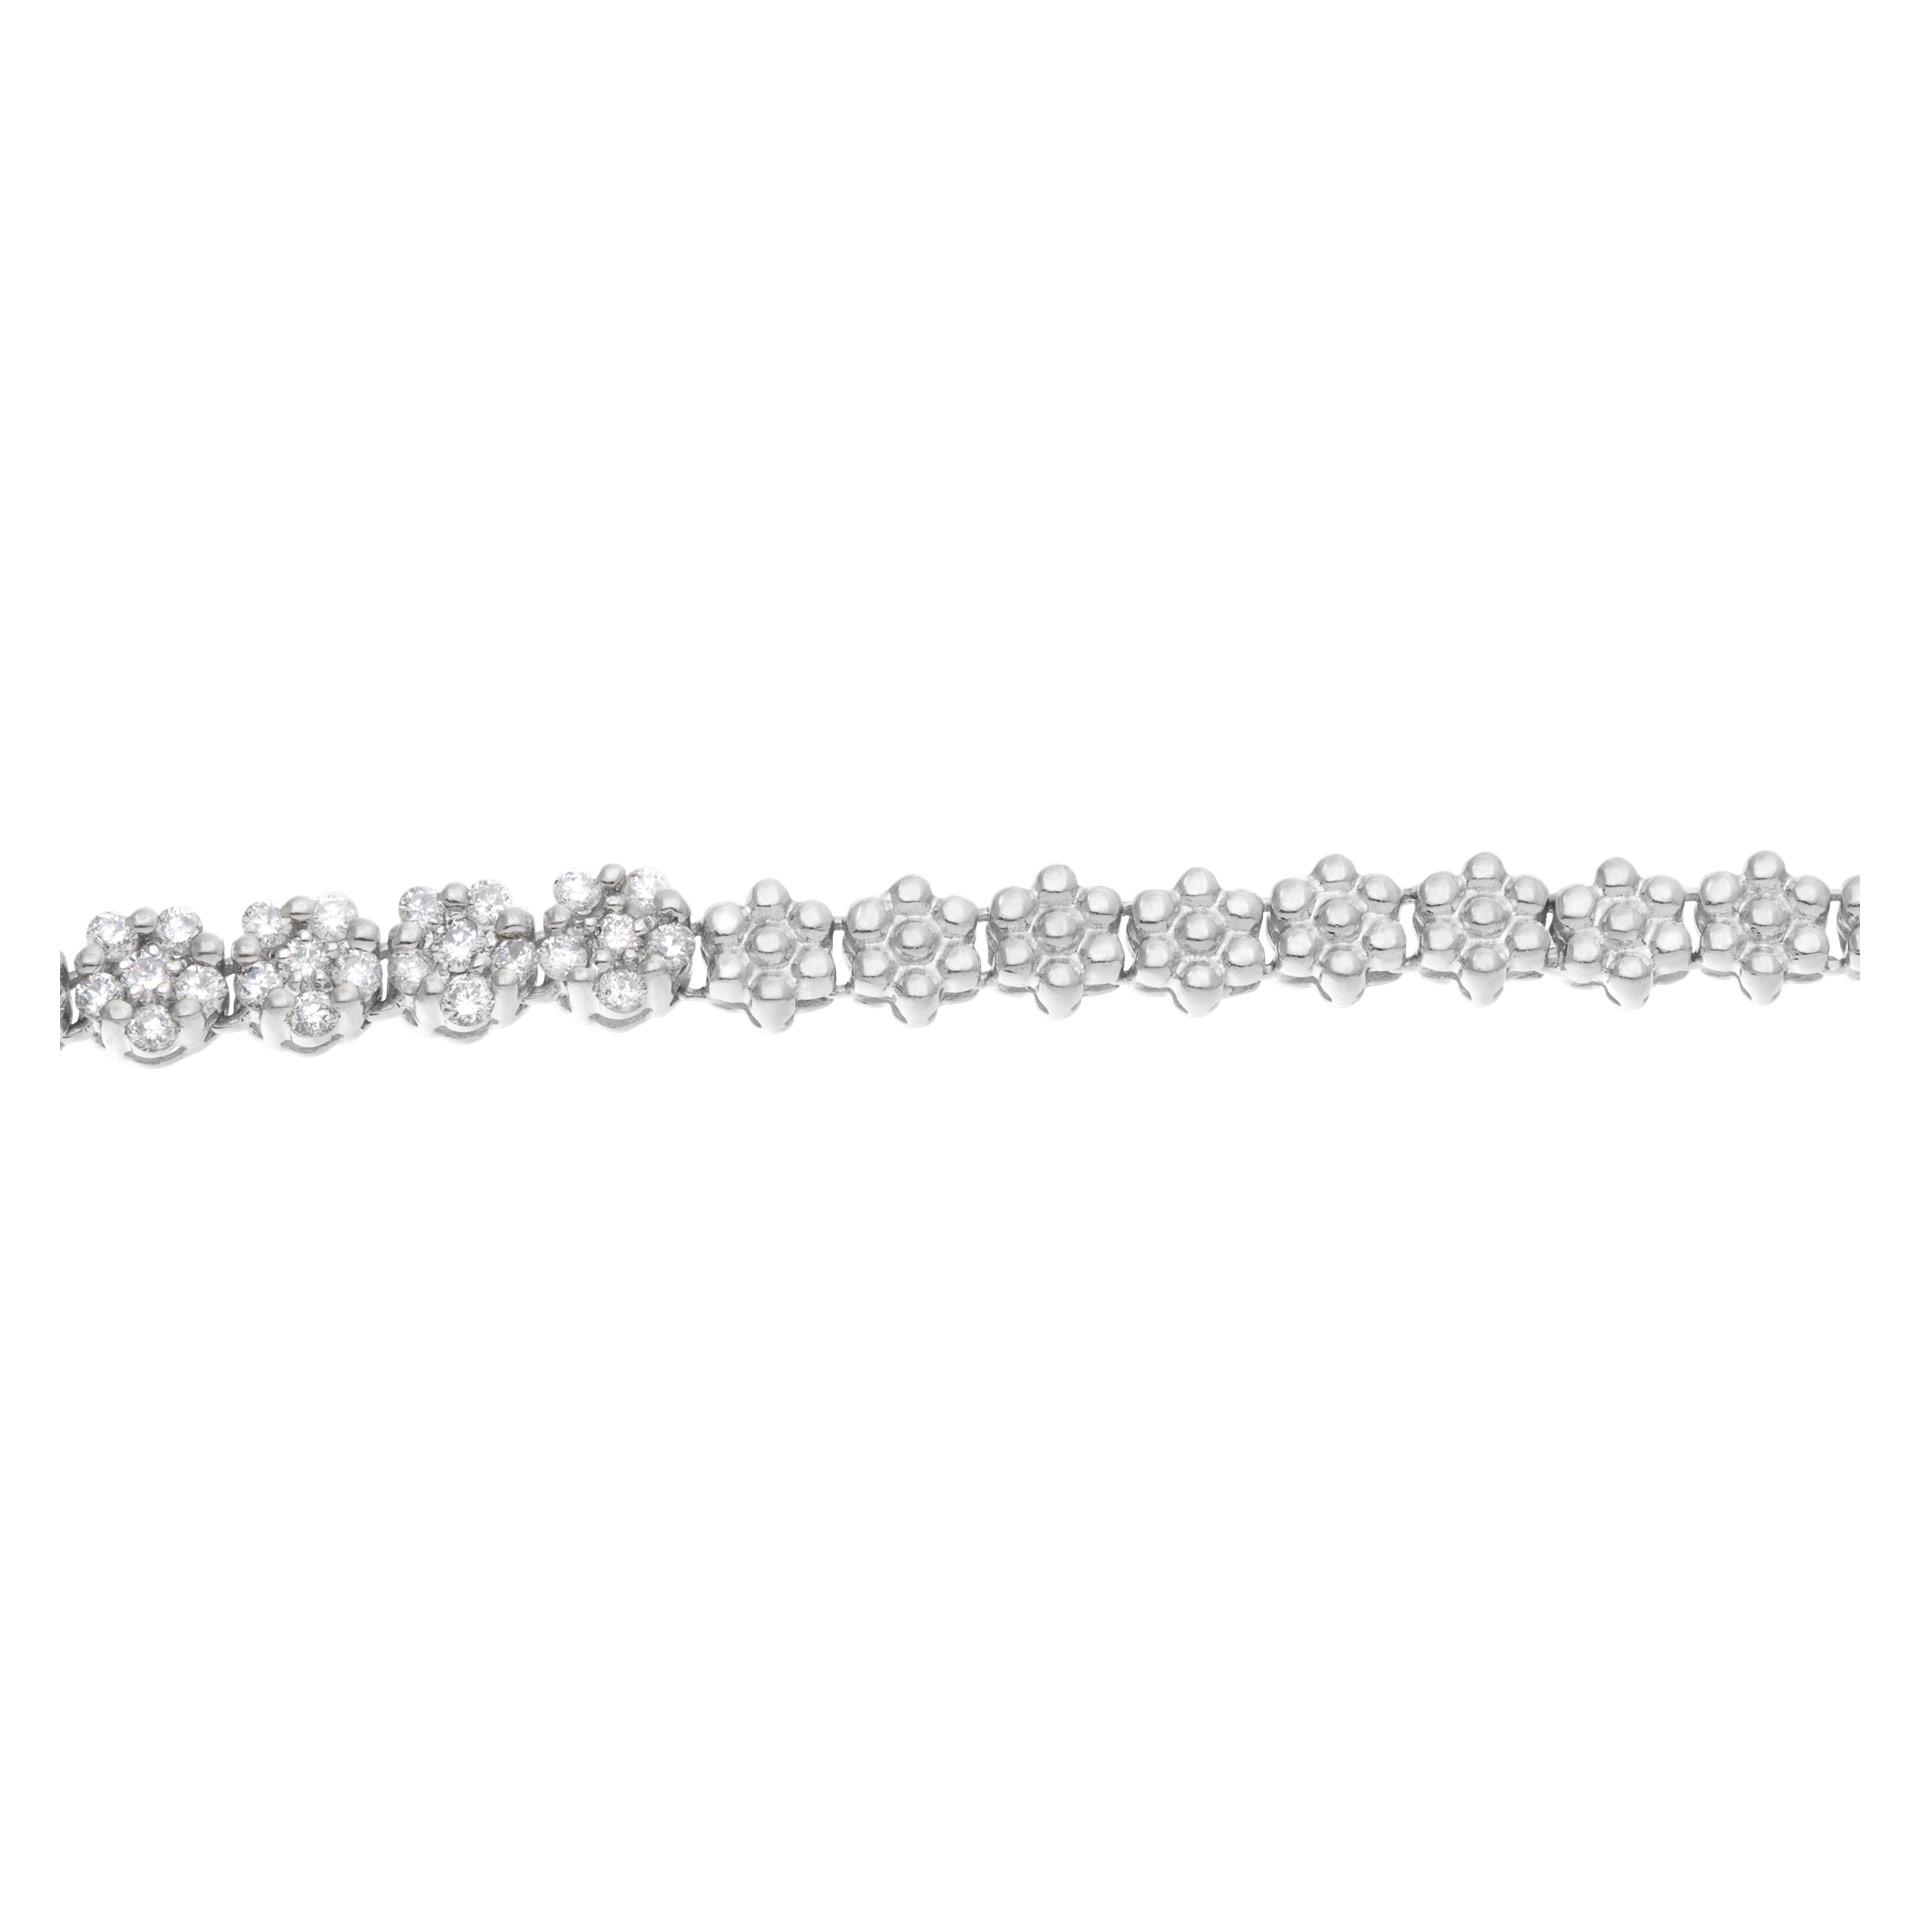 Flower design diamond necklace in 14k white gold. 4.00cts in round brilliant dia's image 3